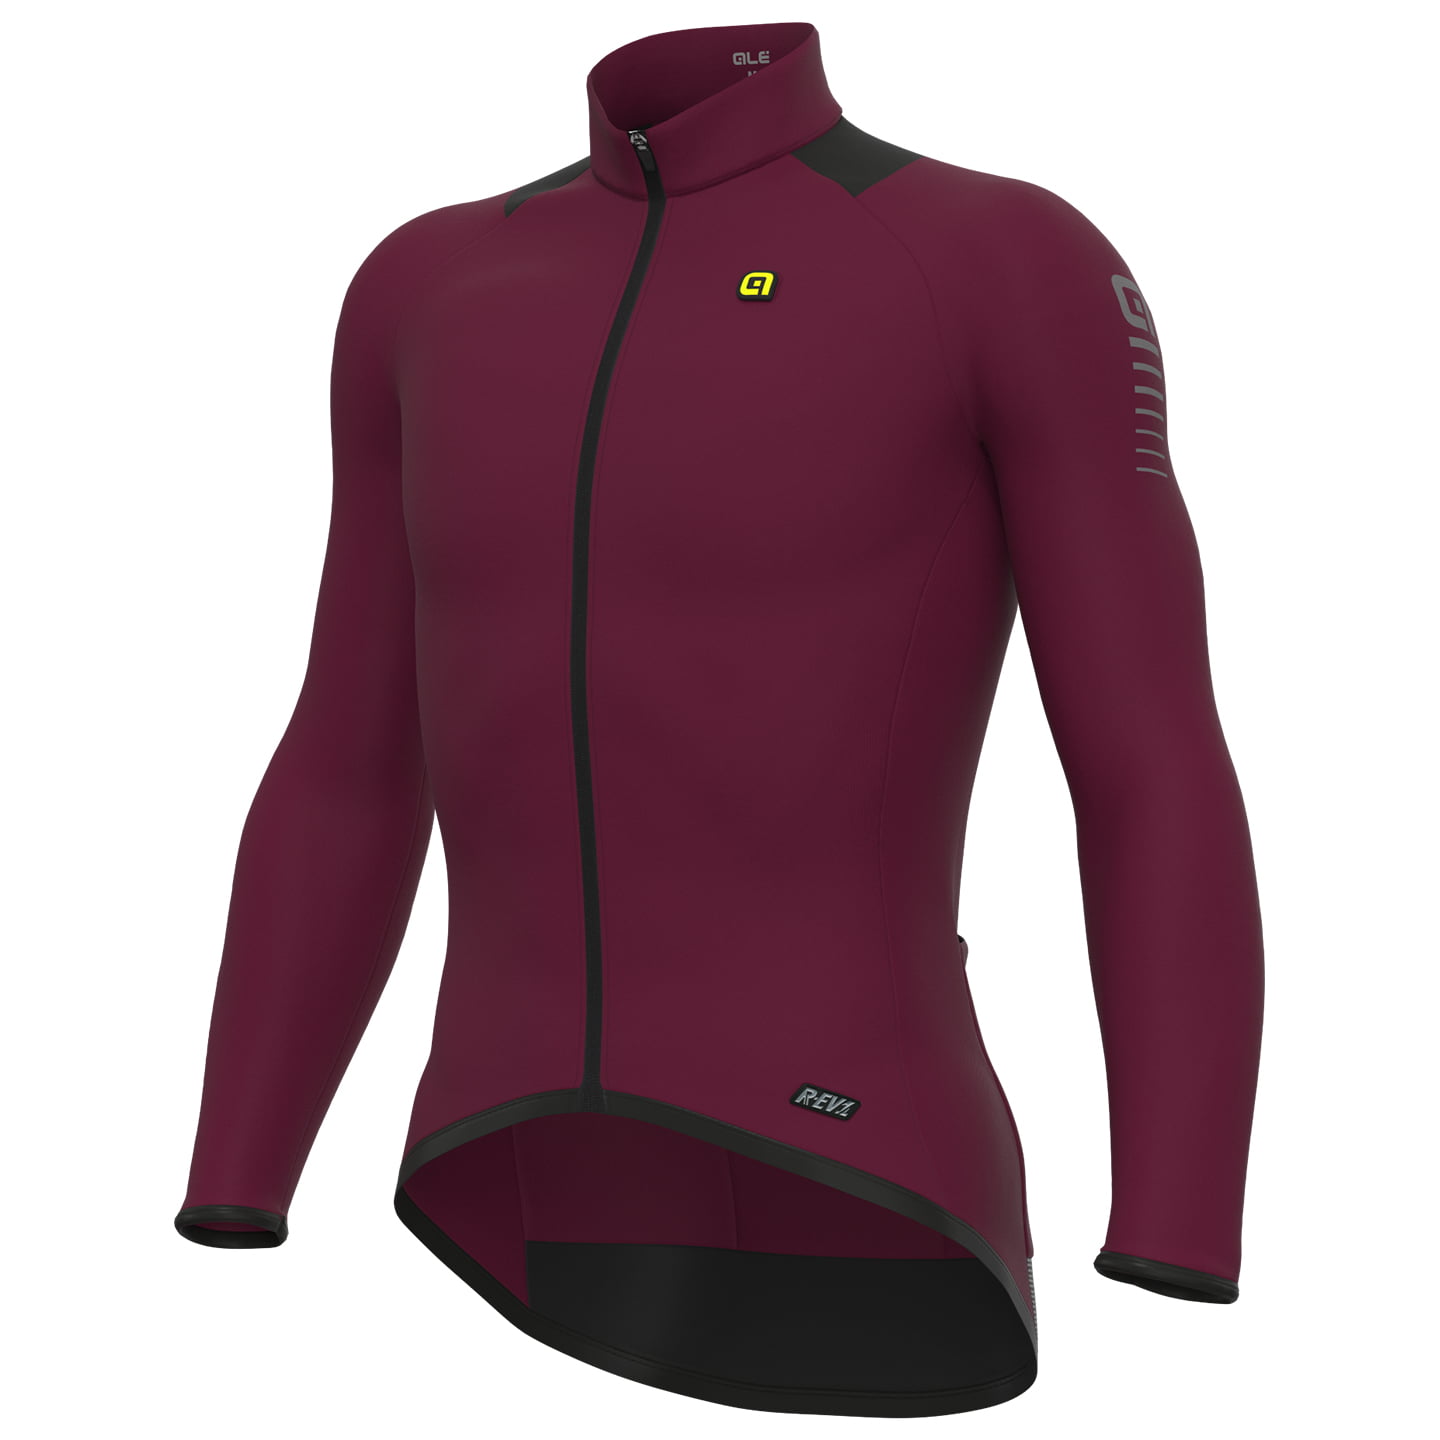 ALE Thermal Long Sleeve Jersey Long Sleeve Jersey, for men, size XL, Cycling jersey, Cycle clothing